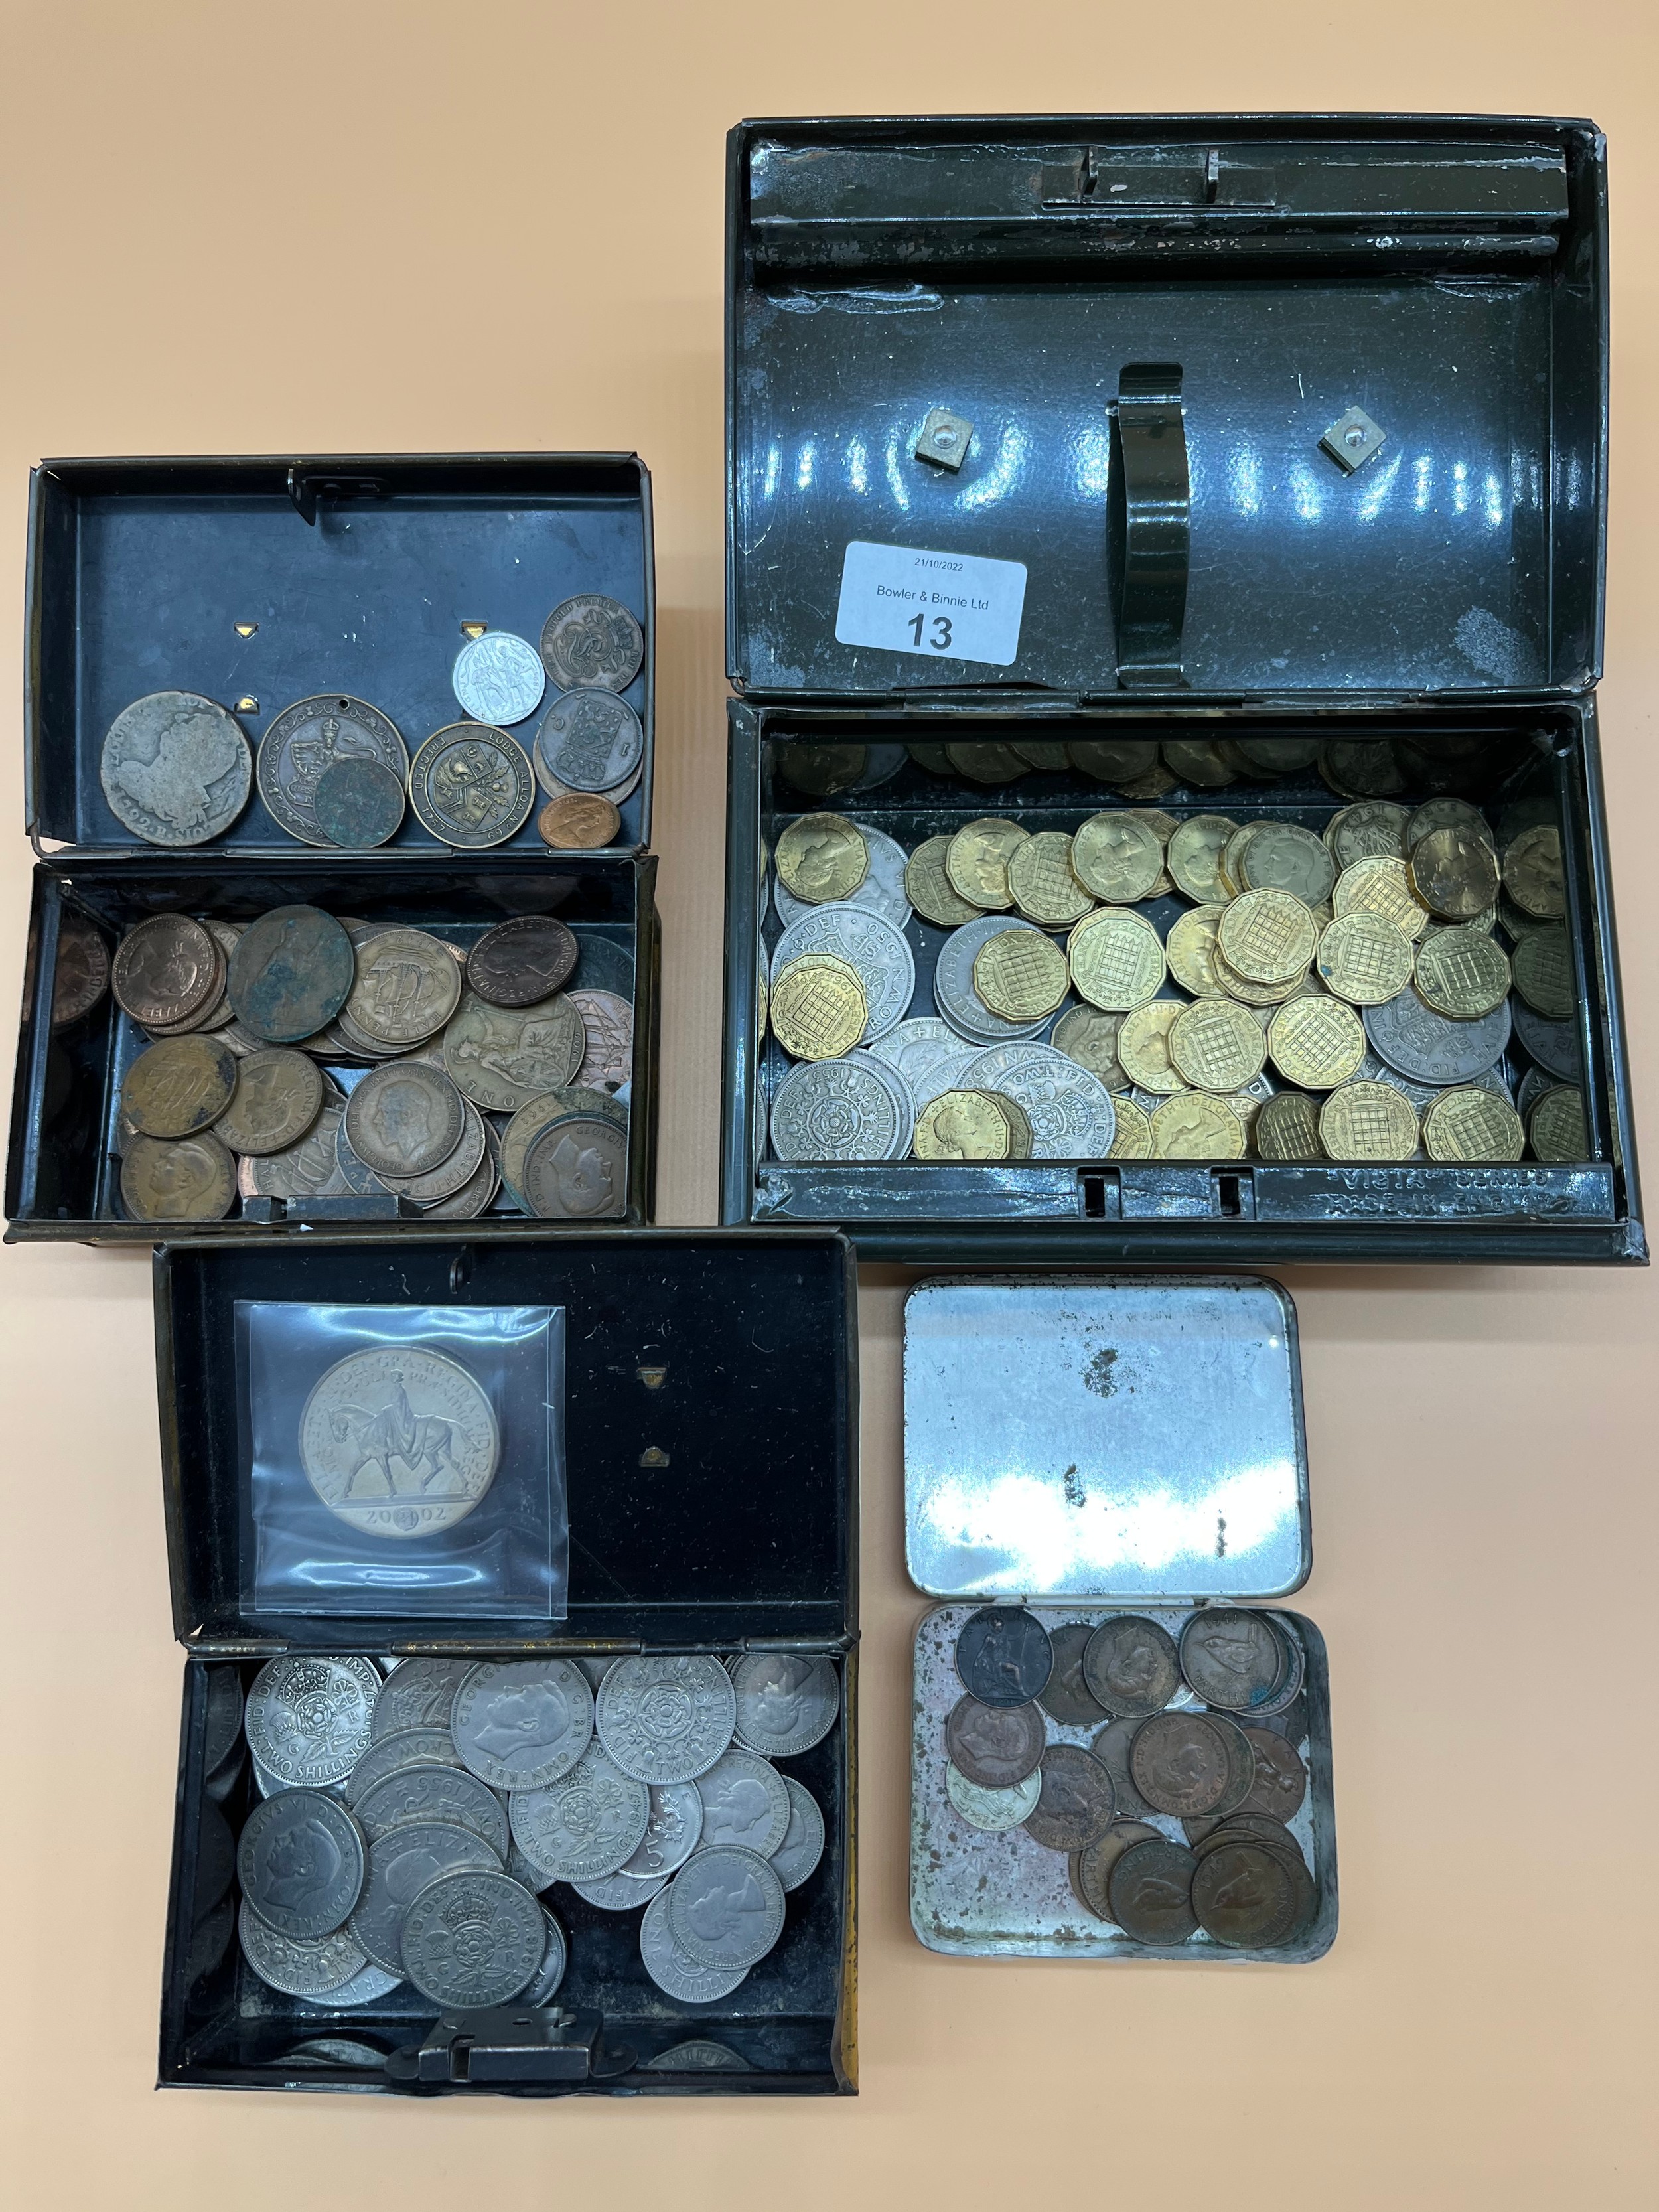 Four tins of various British coinage, Includes Masonic coin, one pennies, Three pence and crowns